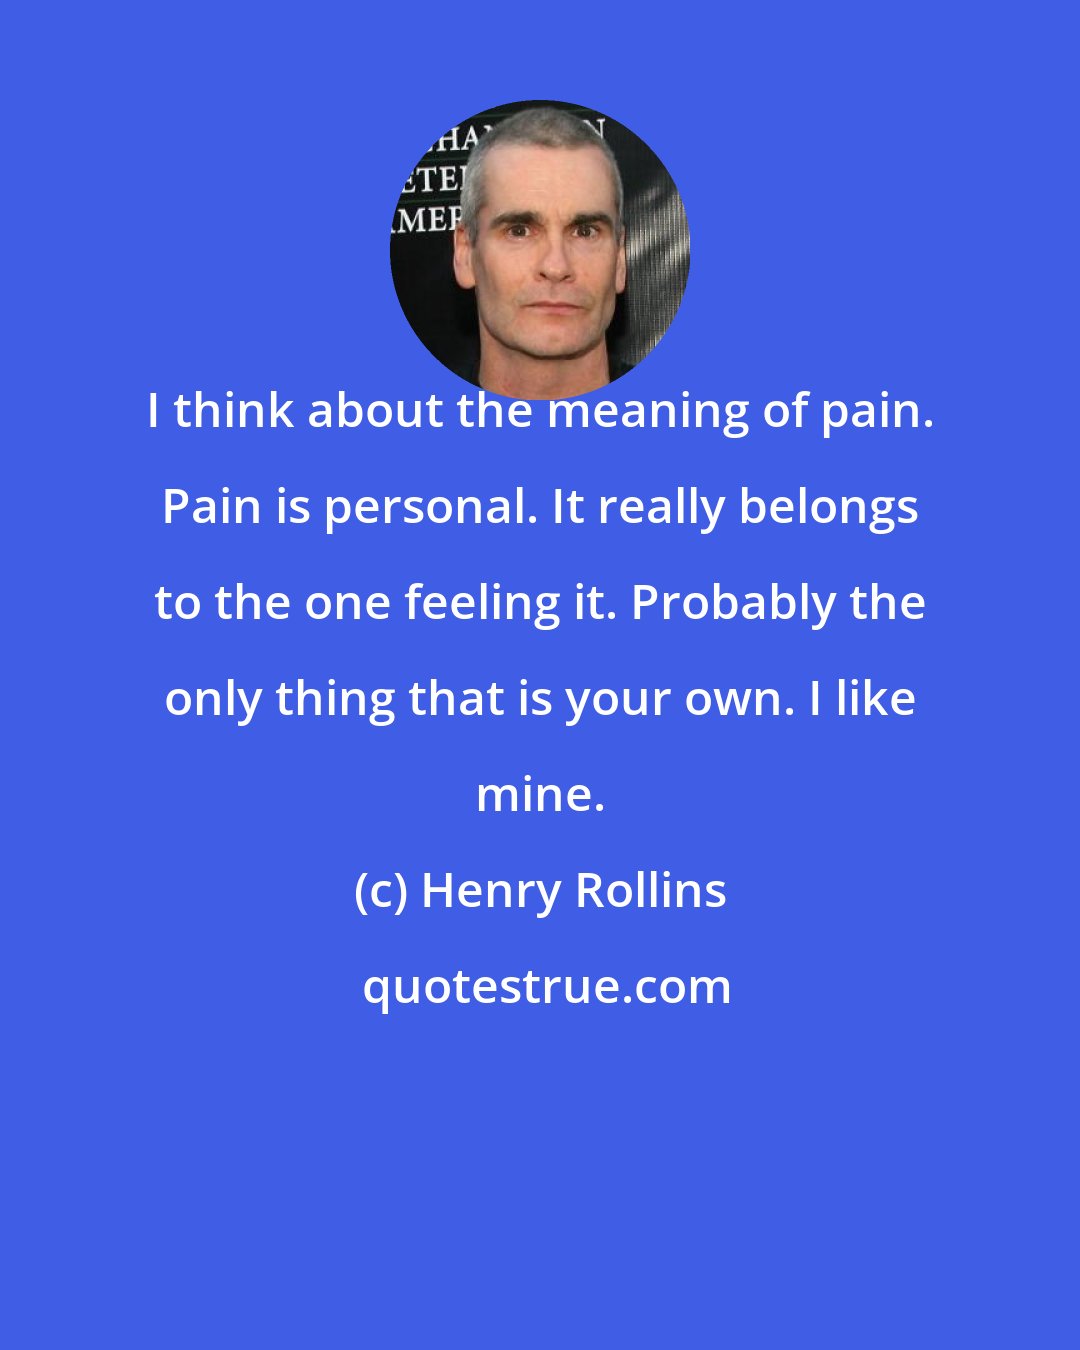 Henry Rollins: I think about the meaning of pain. Pain is personal. It really belongs to the one feeling it. Probably the only thing that is your own. I like mine.